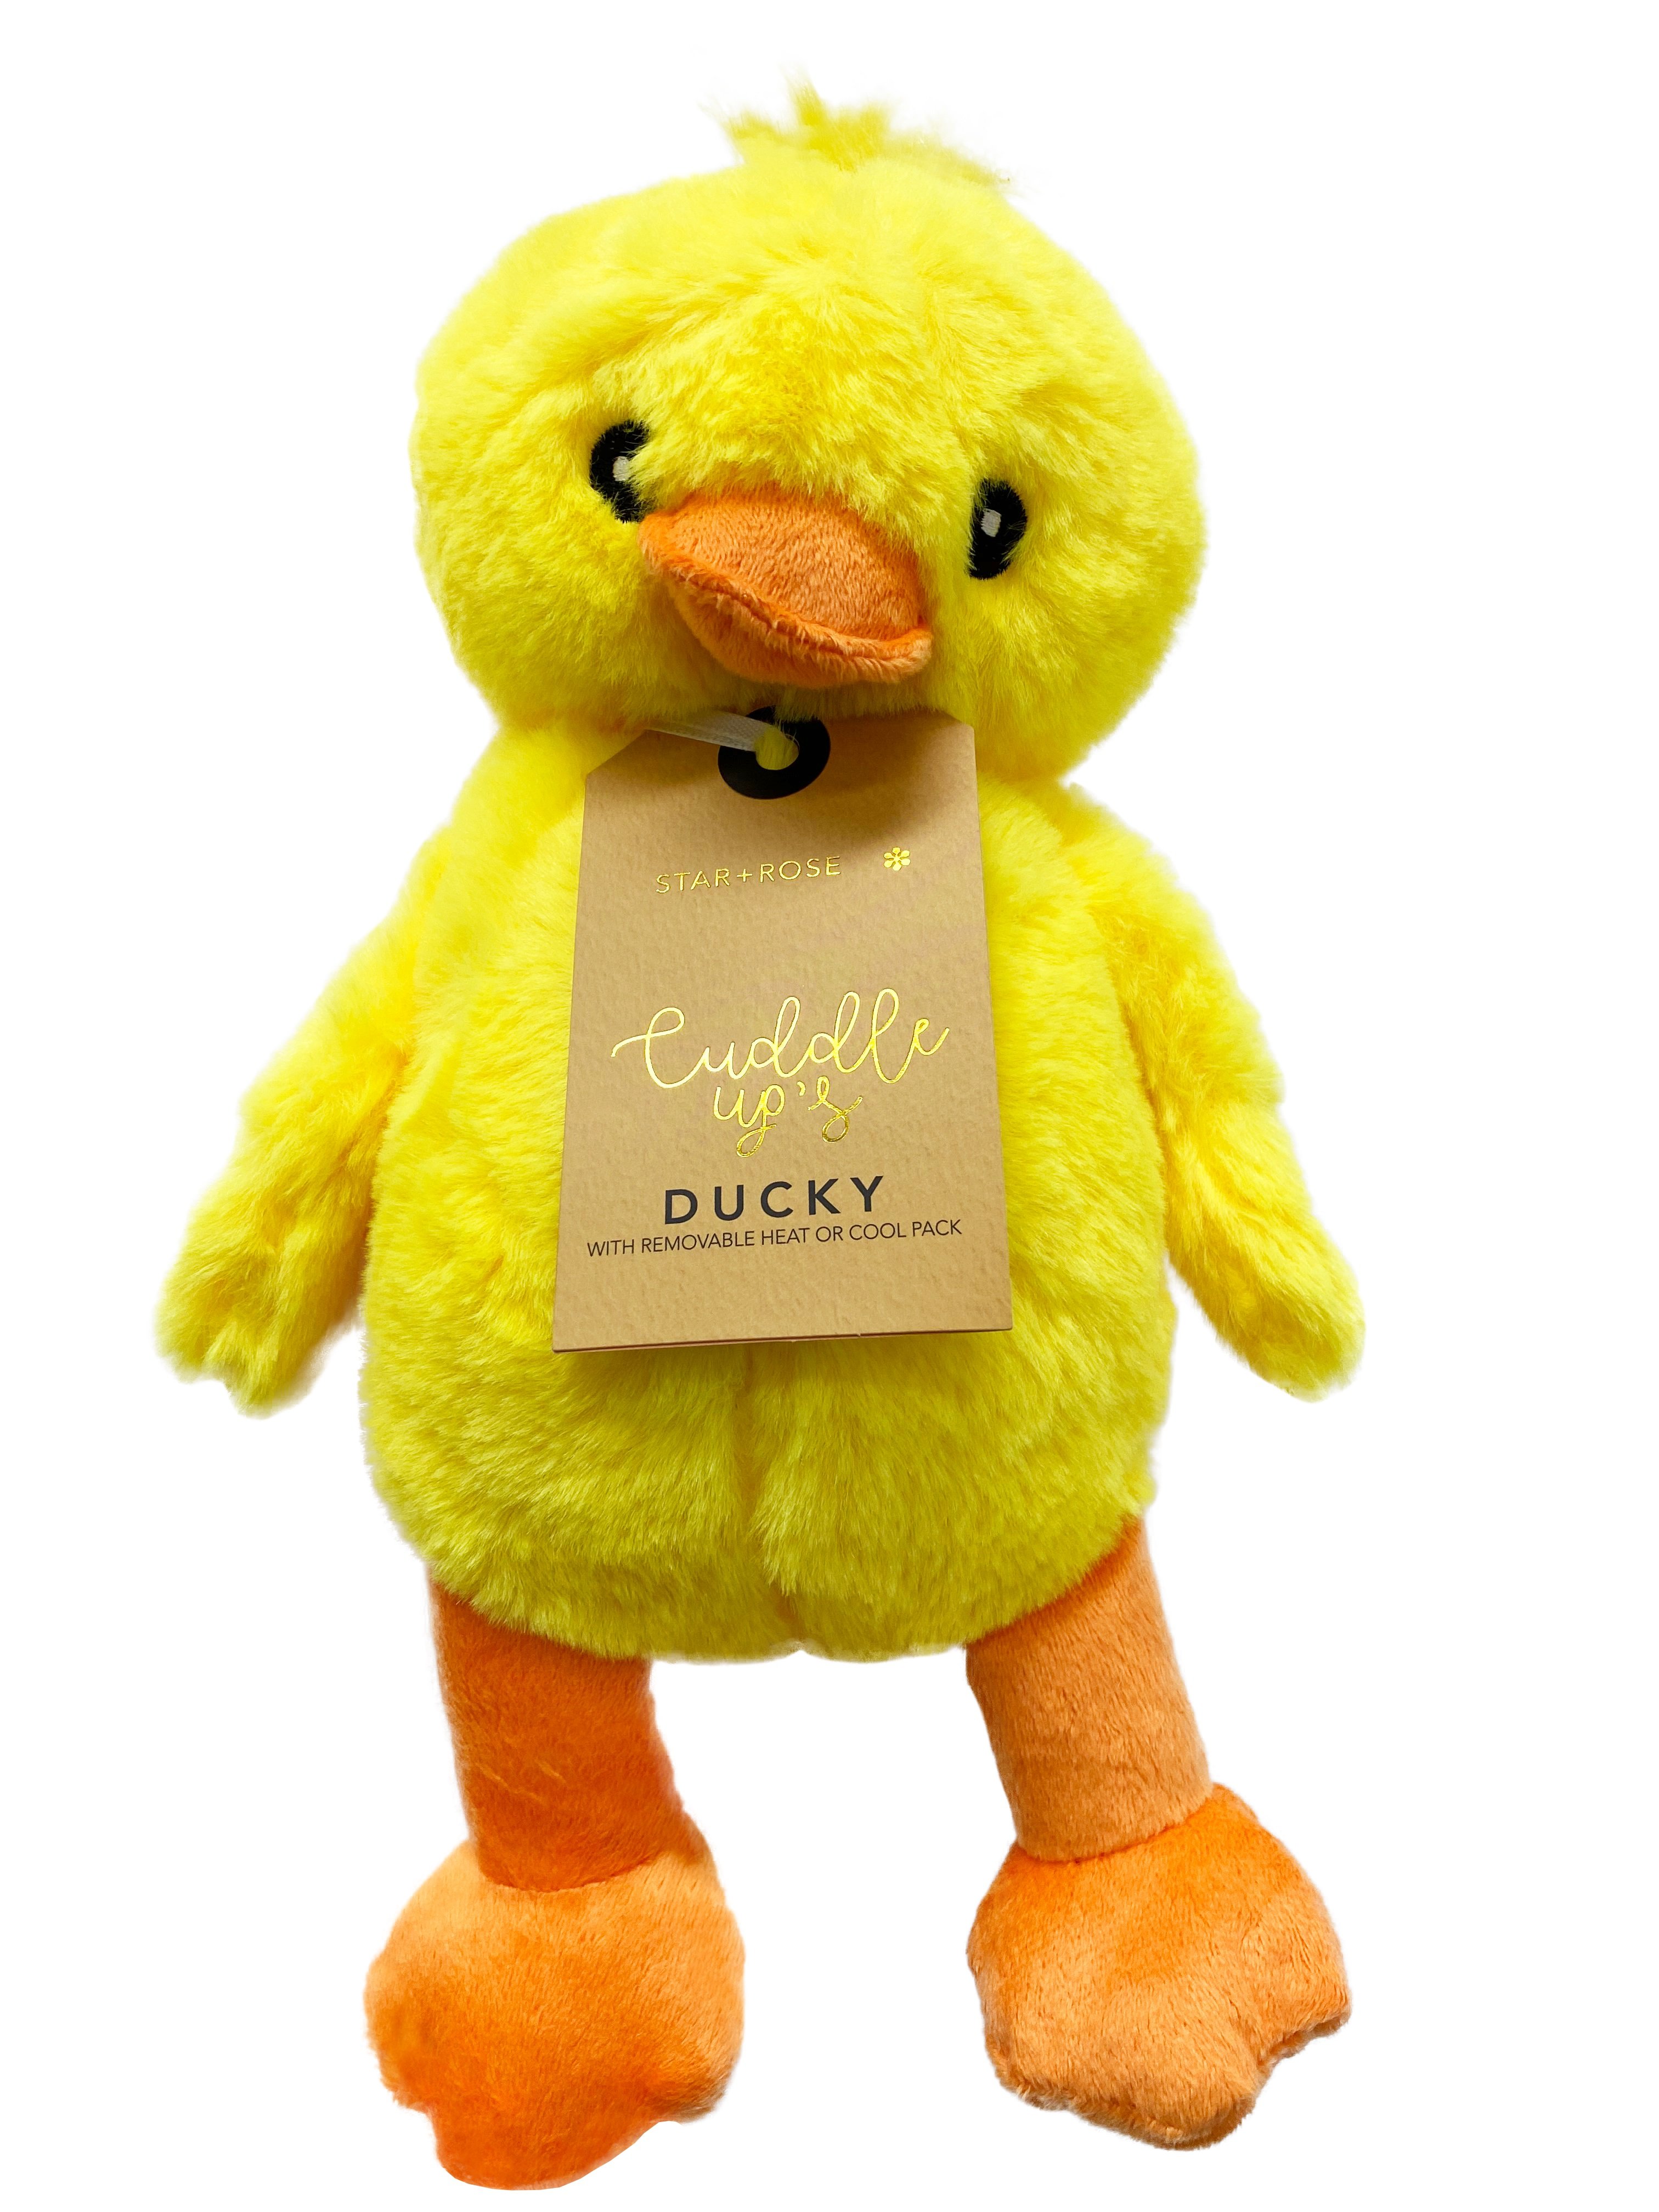 Ducky Cuddle up - Click to enlarge